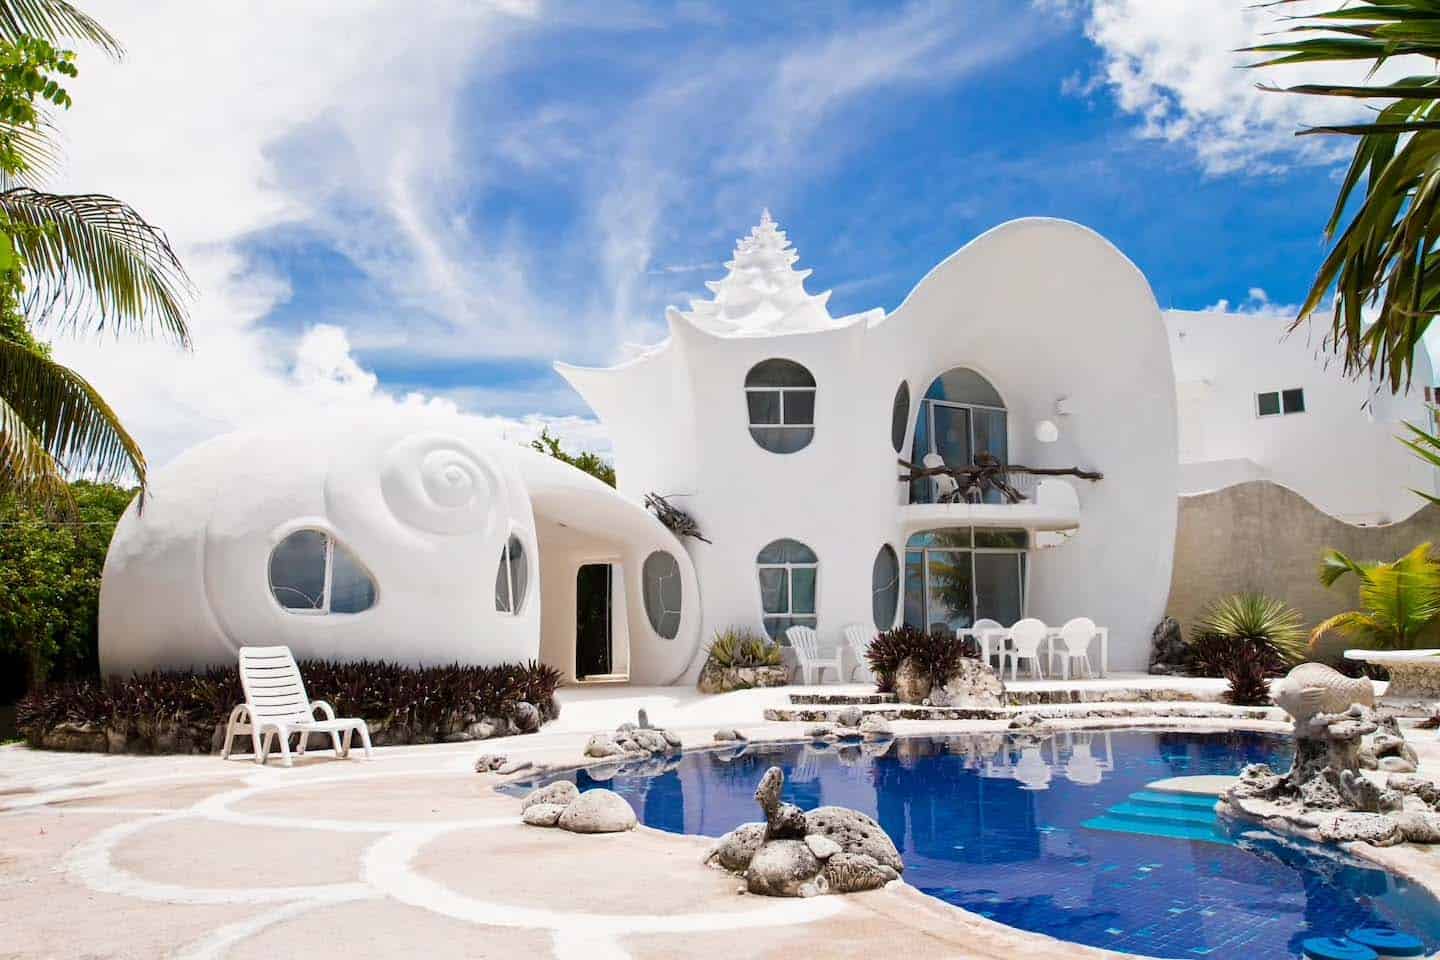 Take a dreamy vacation in a seashell house on Isla Mujeres, Mexico